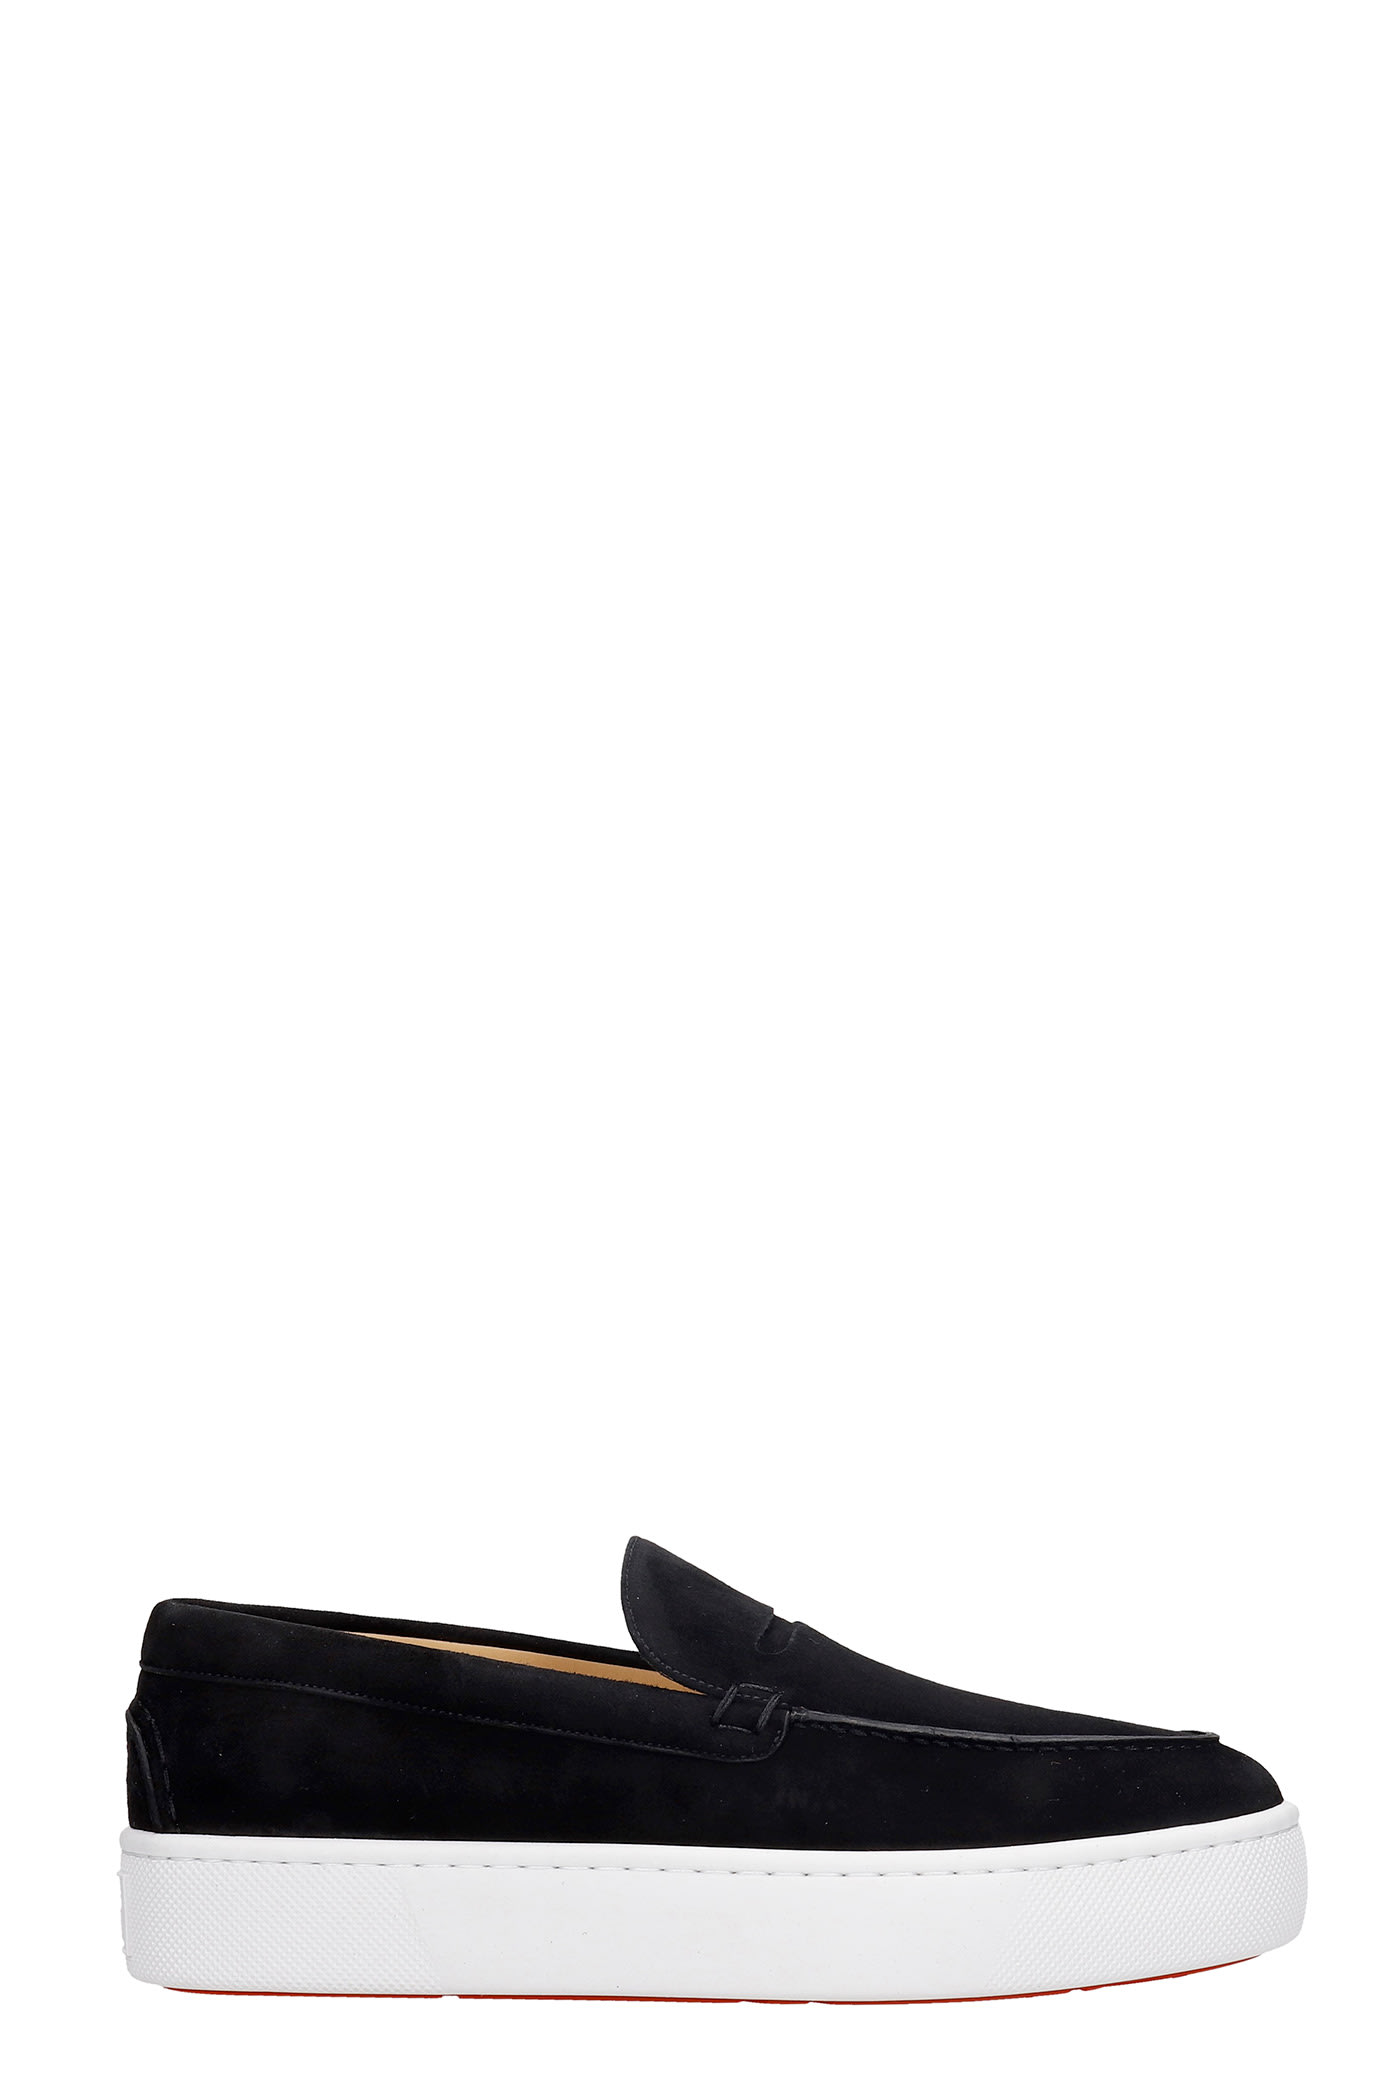 Christian Louboutin Paqueboat Loafers In Black Suede